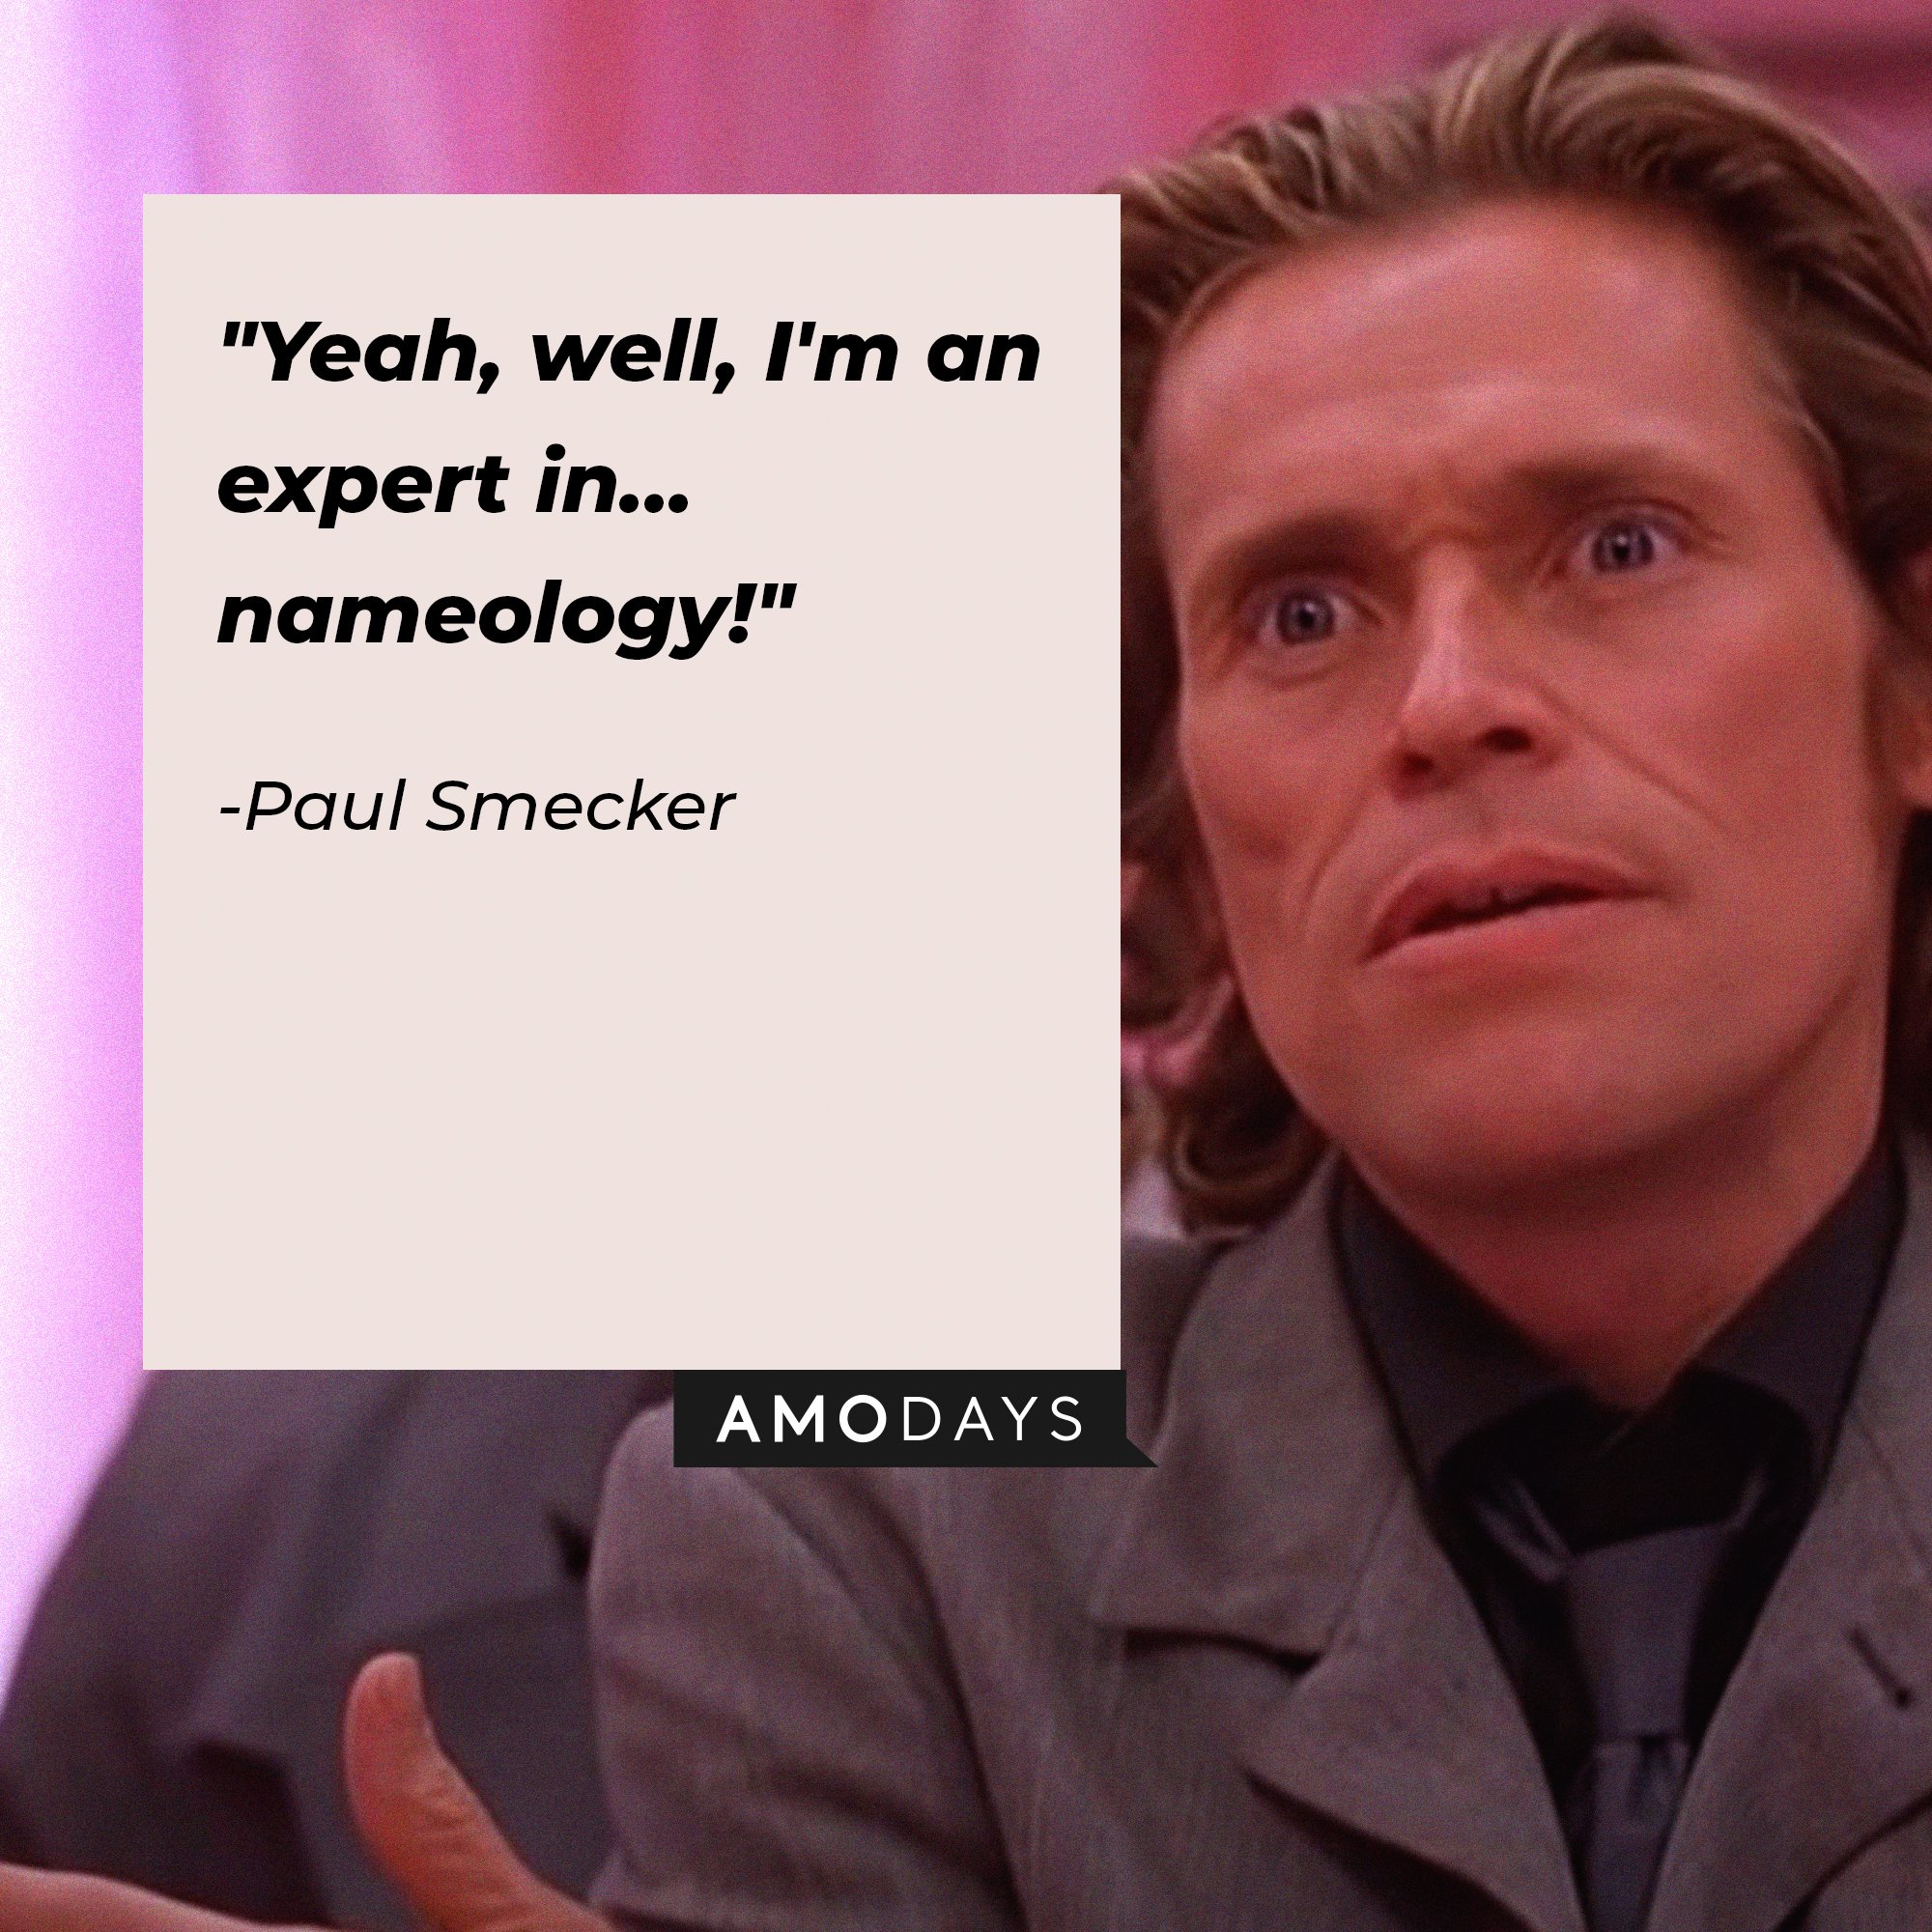   Paul Smecker’s quote: "Yeah, well, I'm an expert in… nameology!" | Image: AmoDays